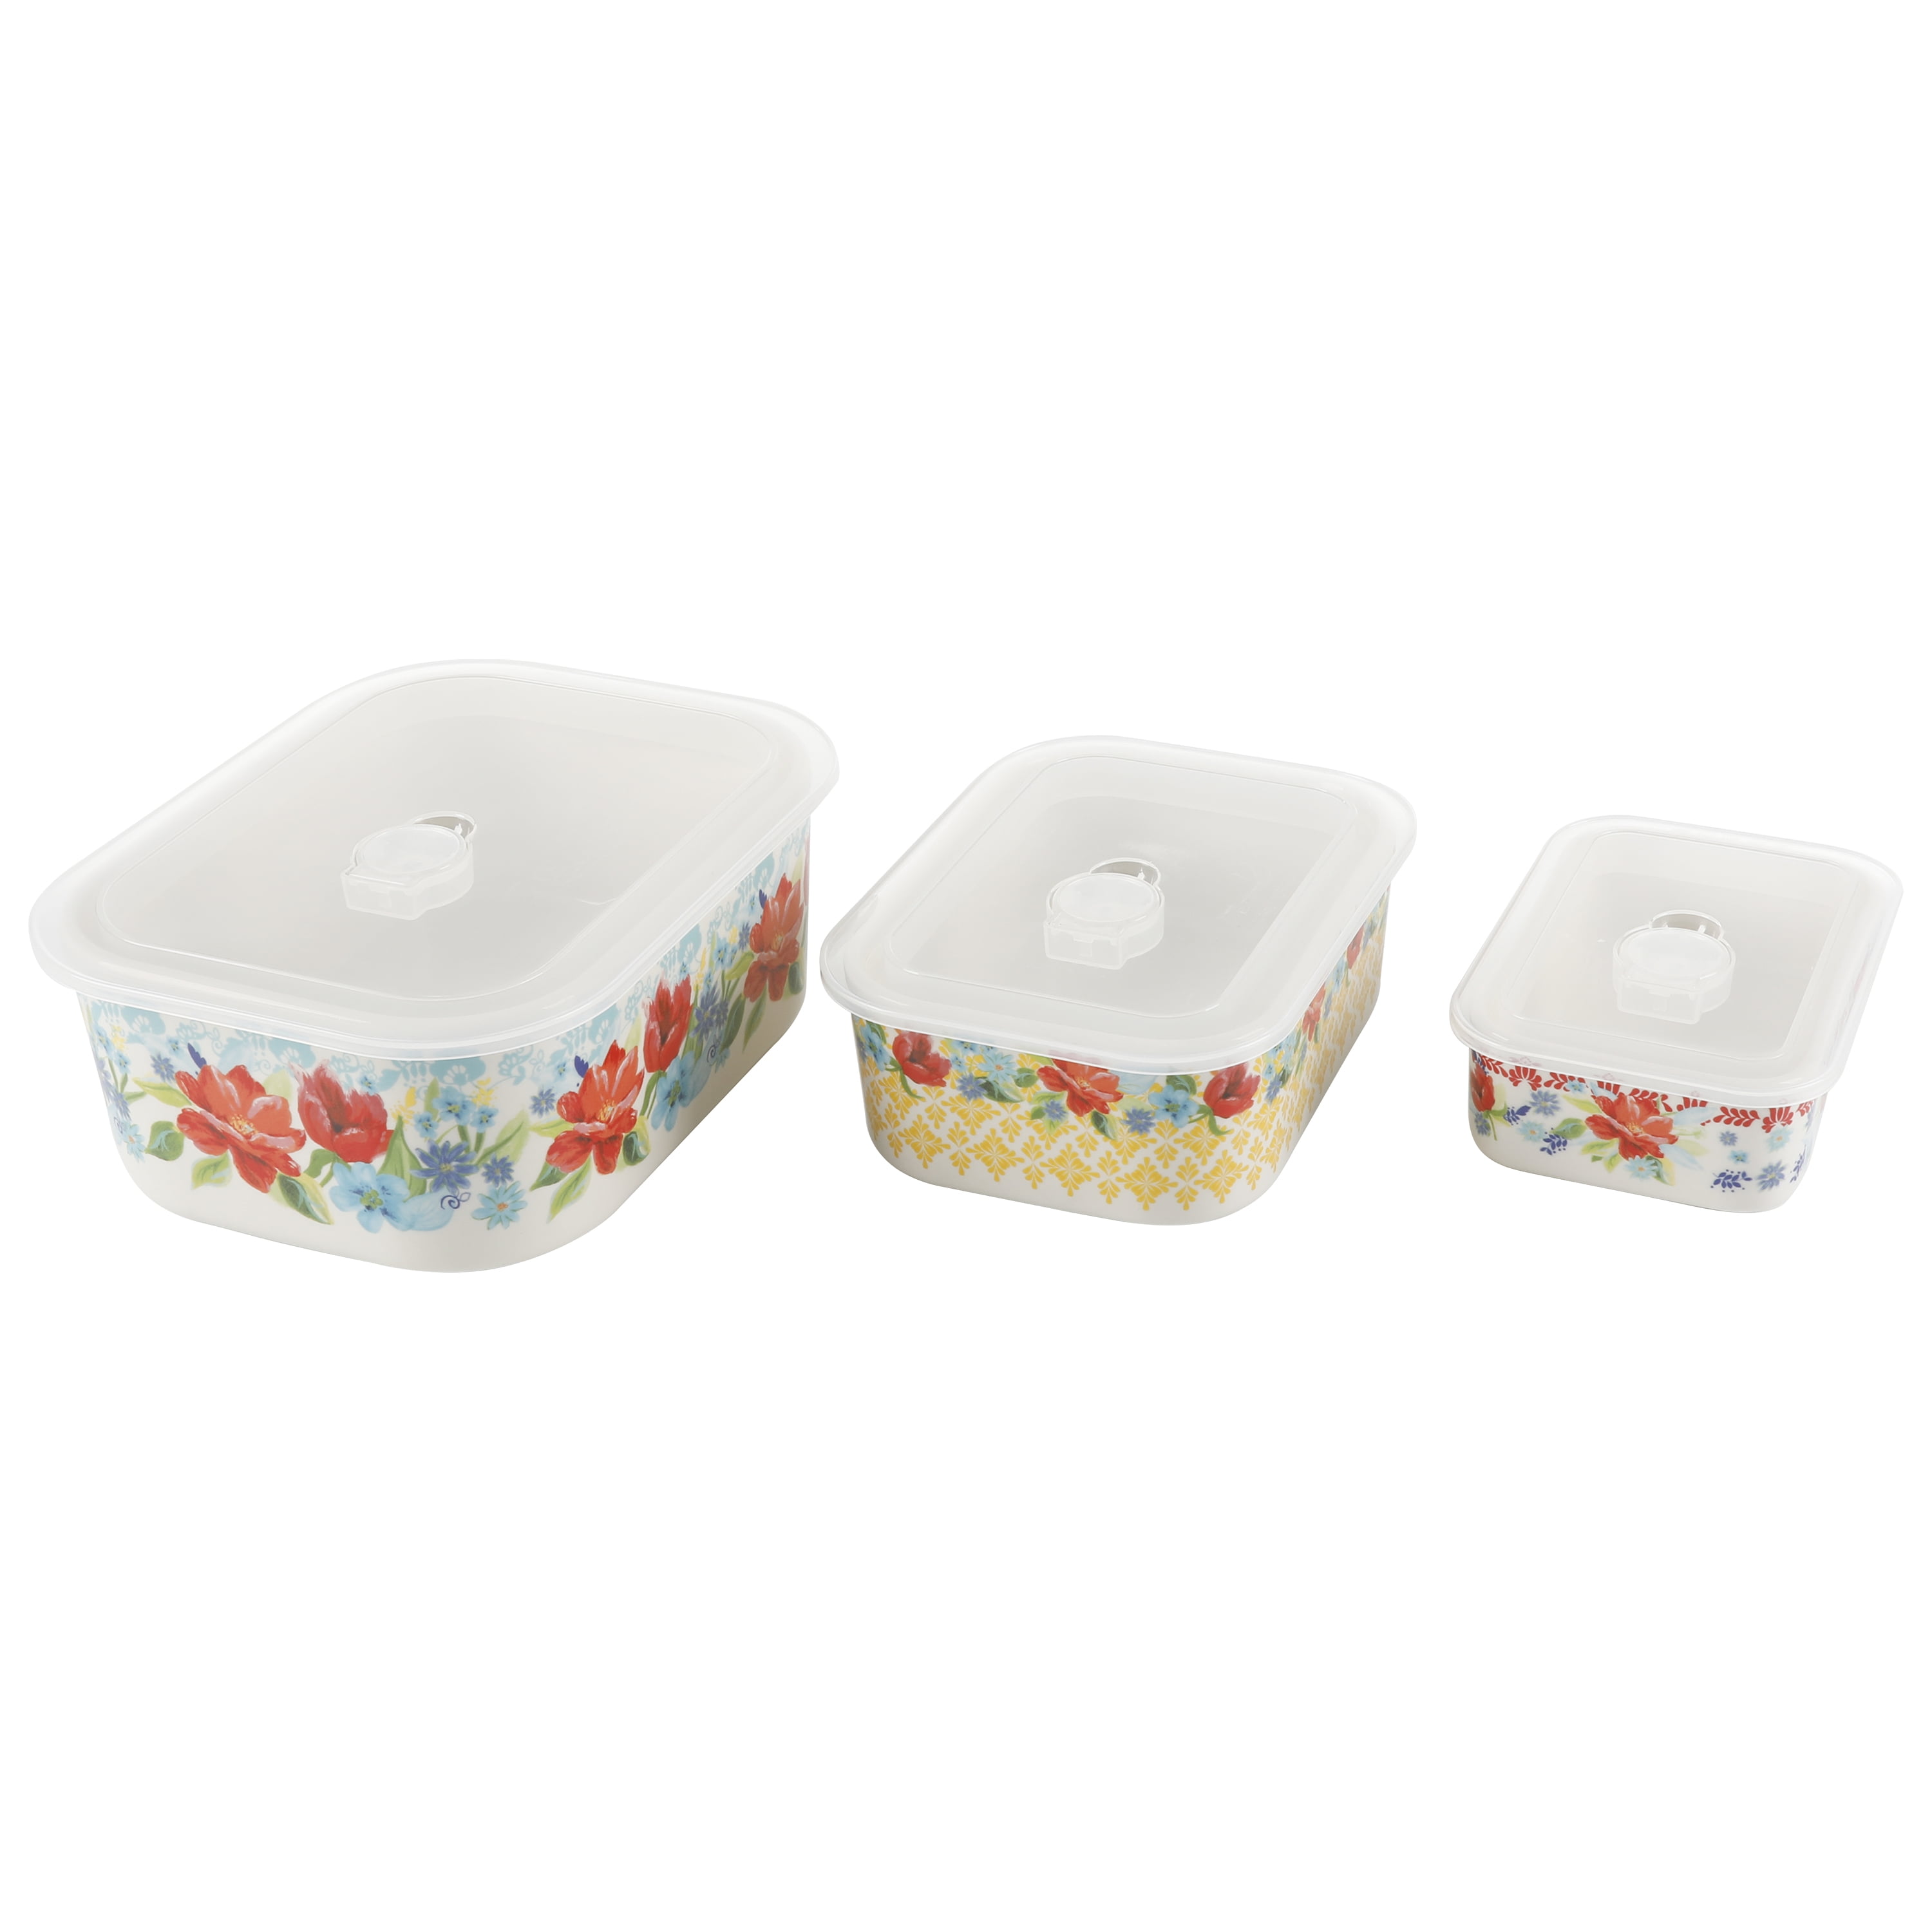 The Pioneer Woman Storage Containers Floral Print - Set of 3 - New